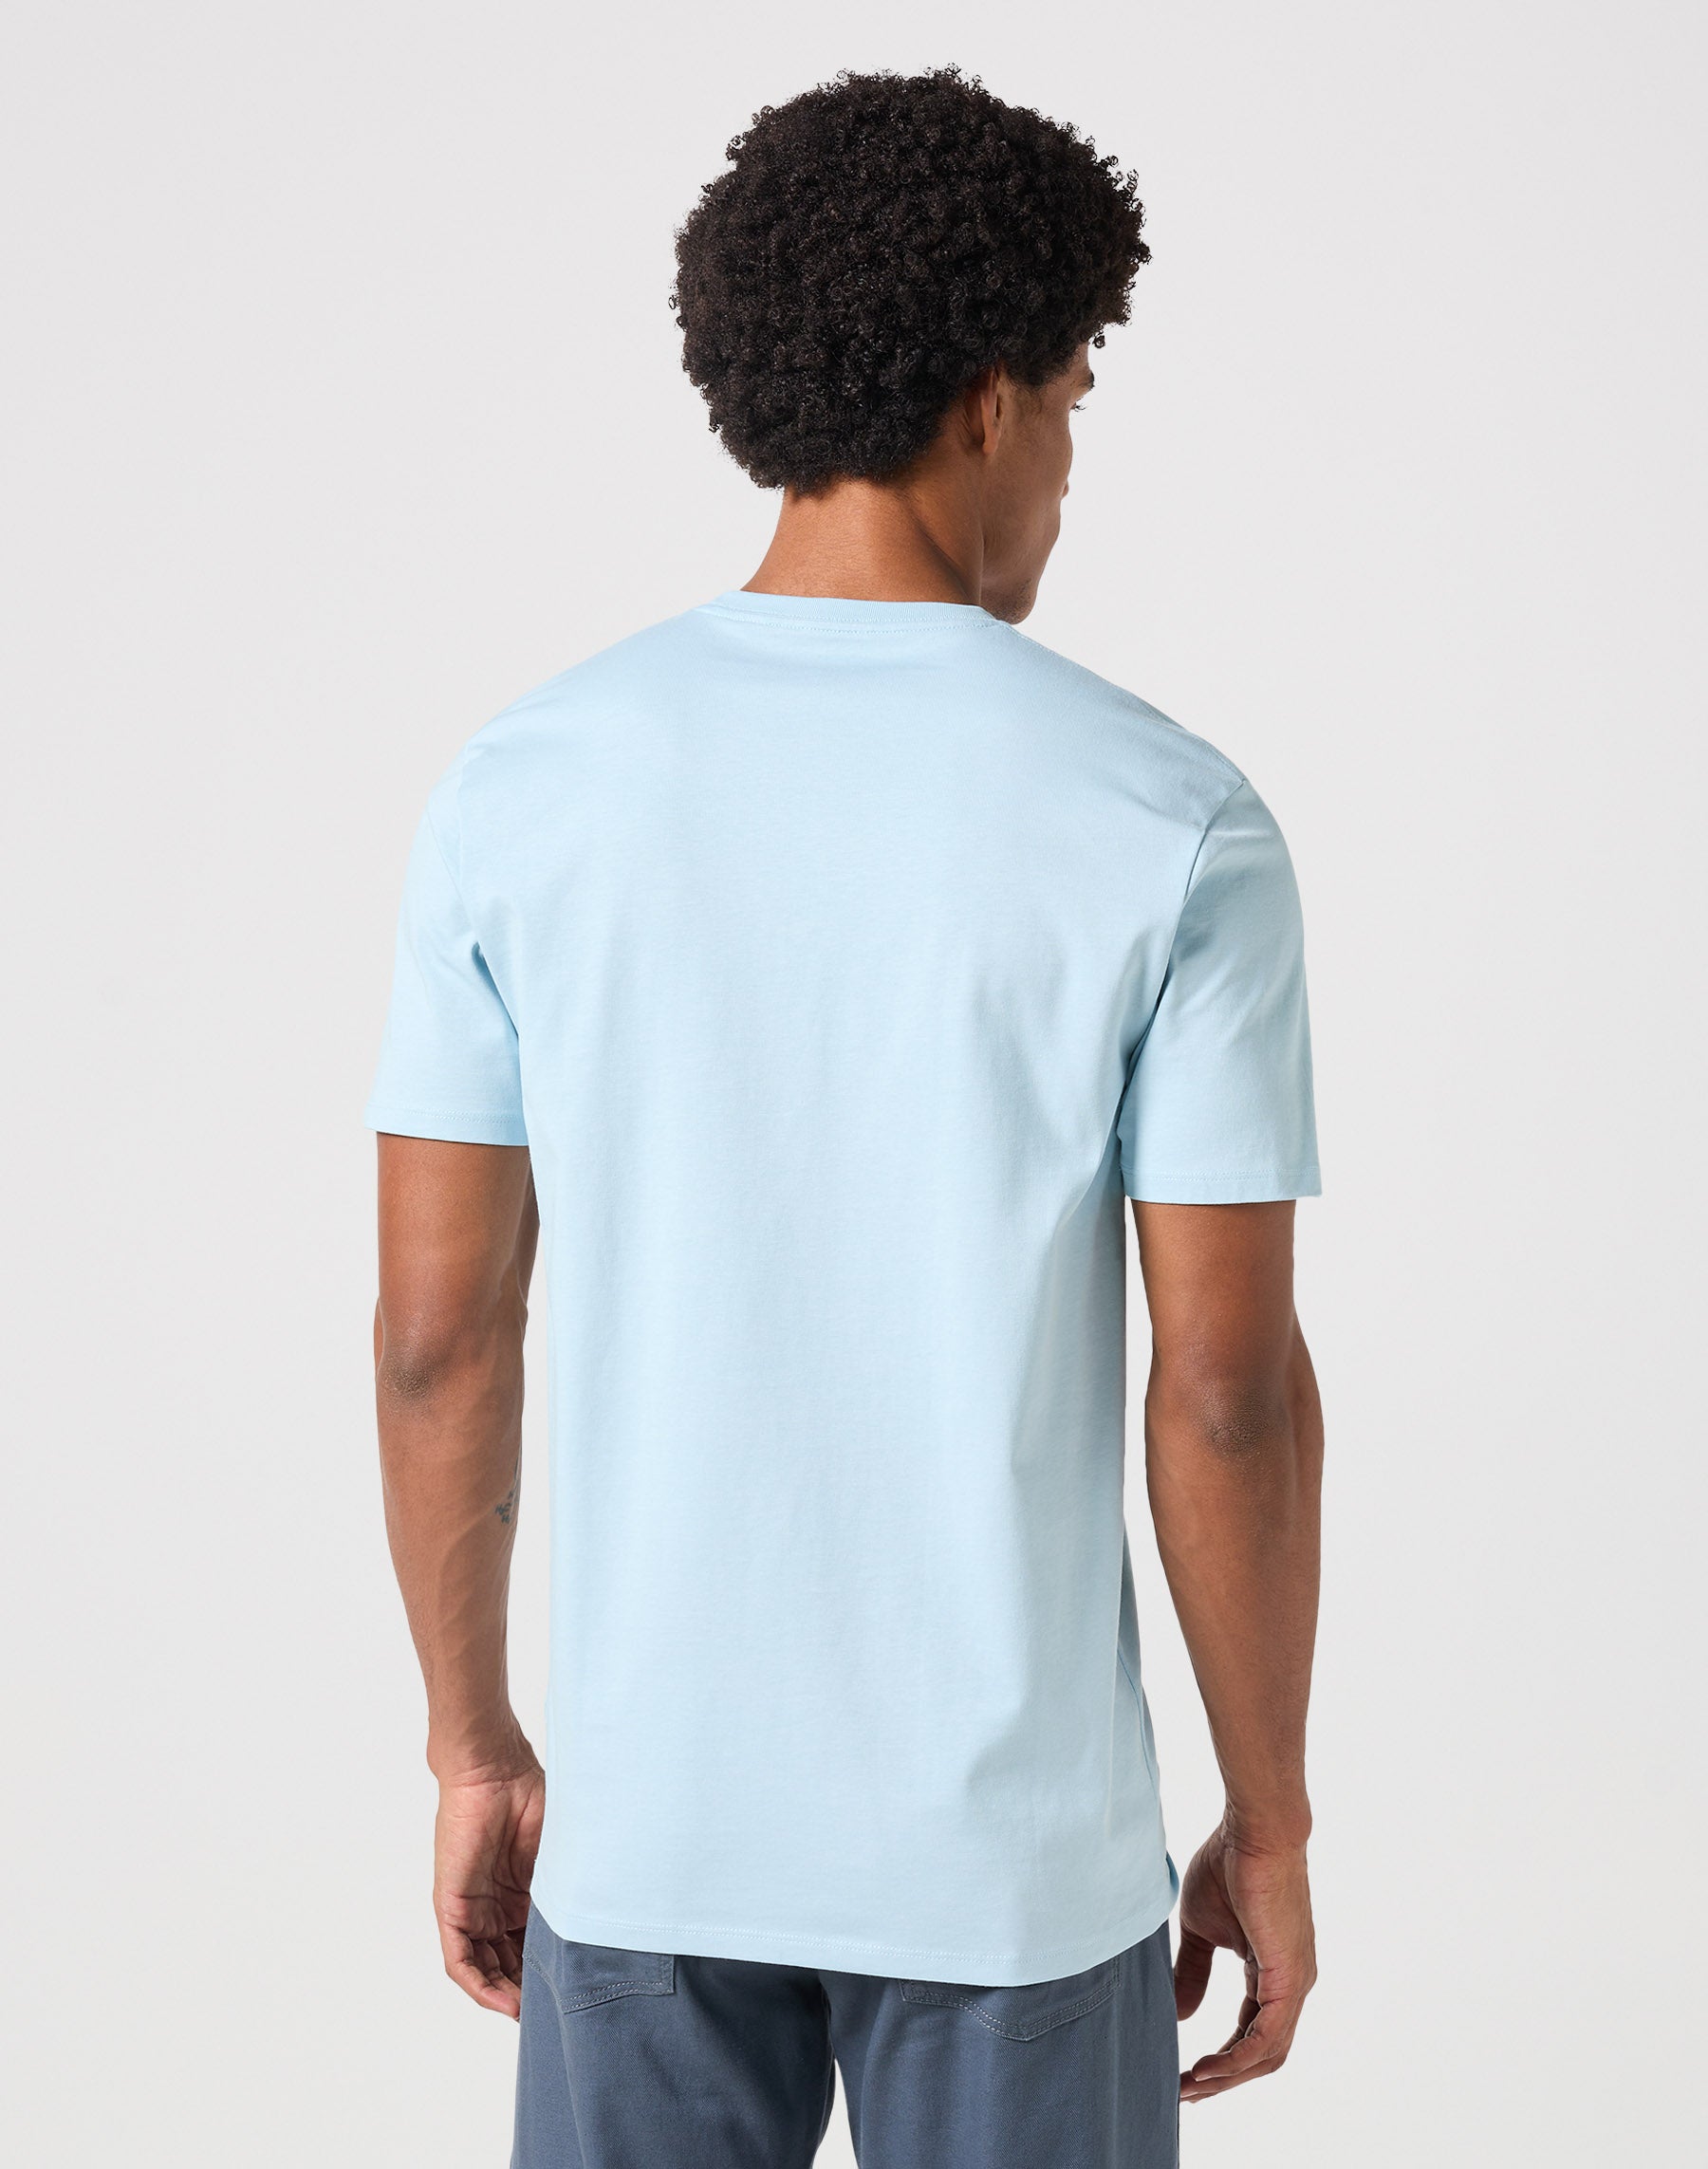 Sign Off Tee in Dream Blue T-Shirts Wrangler   